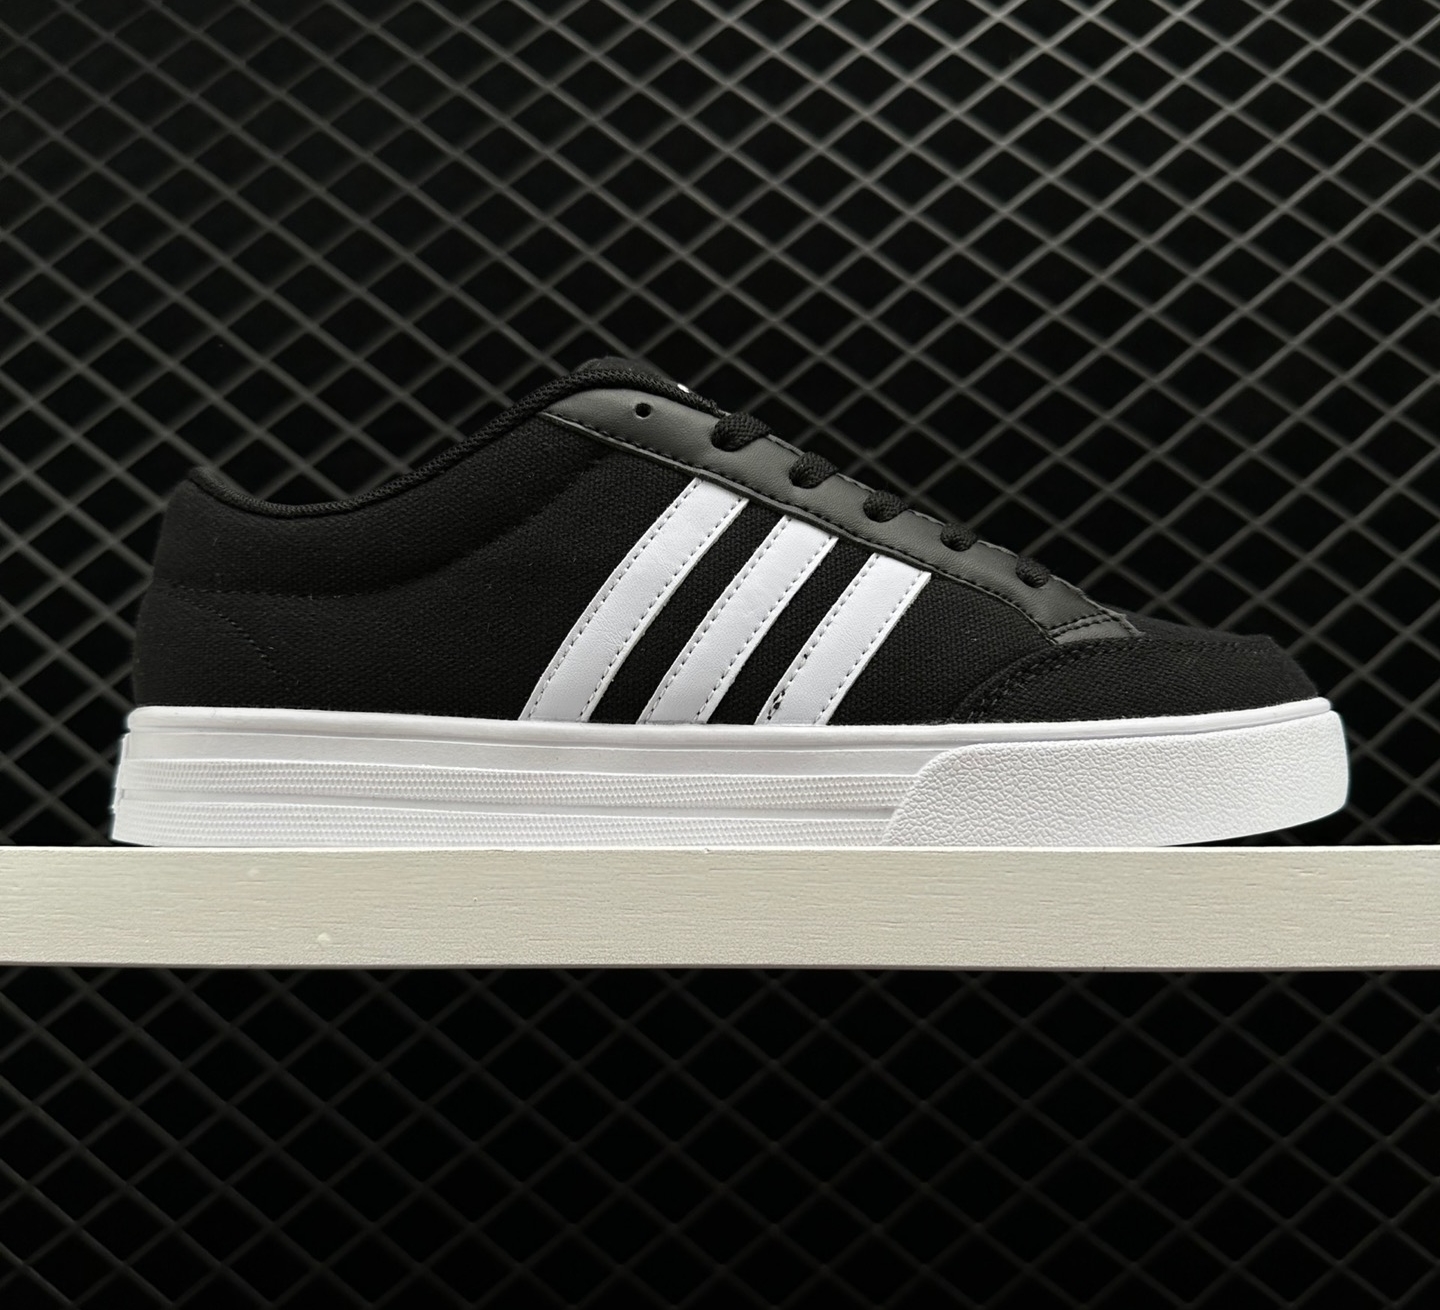 Adidas VS Set Black AW3890: Trendy Sneakers for Sporty Style